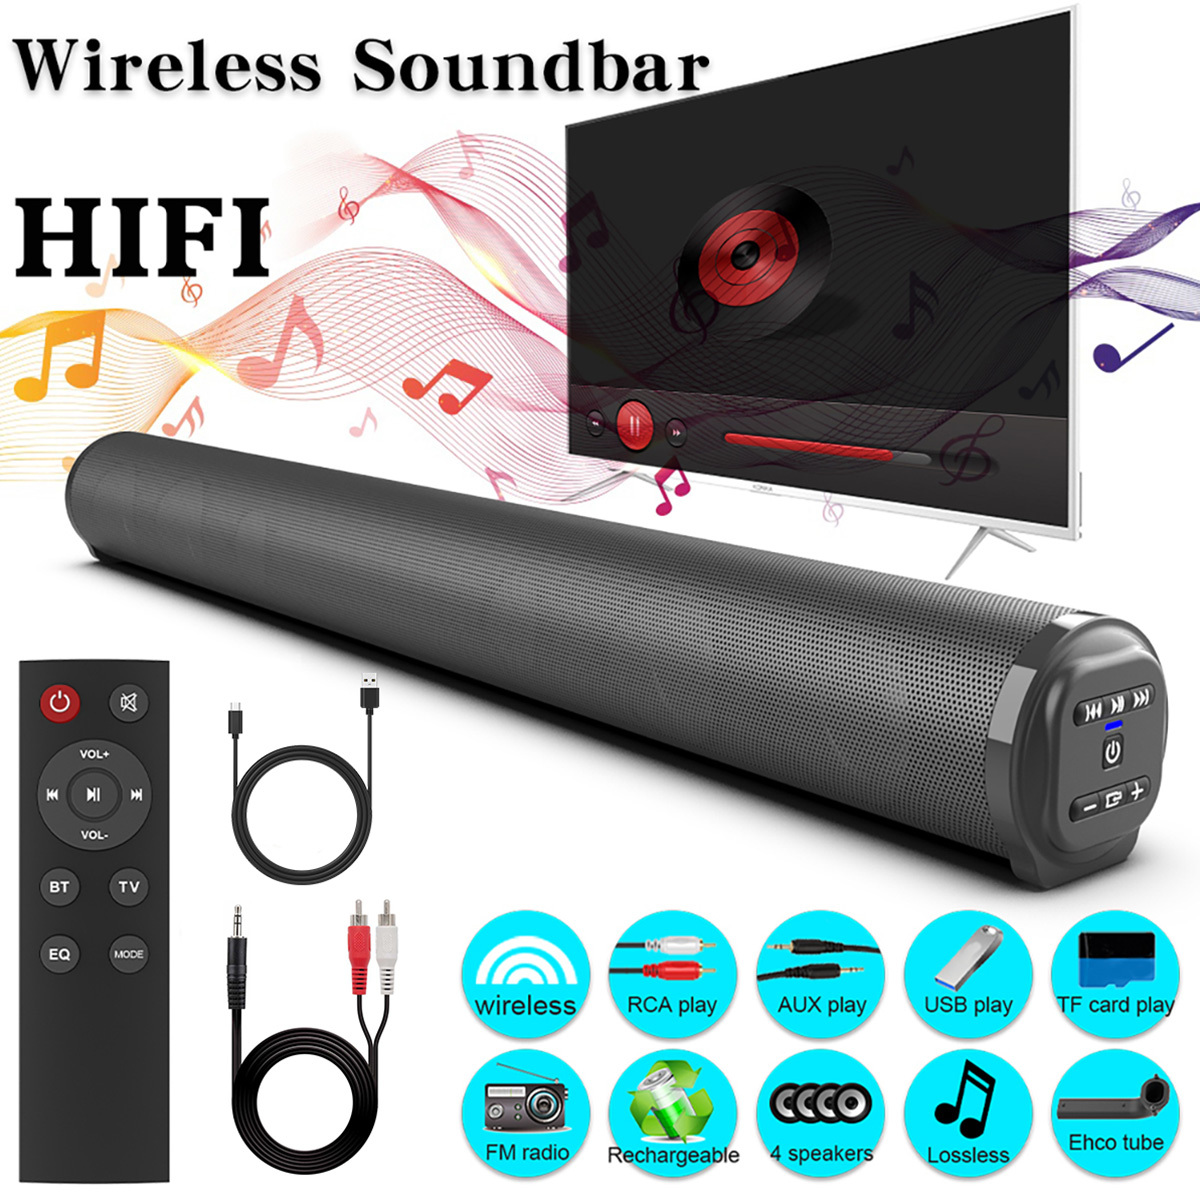 

Soundcars For Tv, 20w Home Theater Sound Bar With Remote Control, Support Tf Card, Usb, Aux And Rca Audio Input, Surround Sound System Speaker With 4pcs Subwoofer For Pc/gaming/projectors